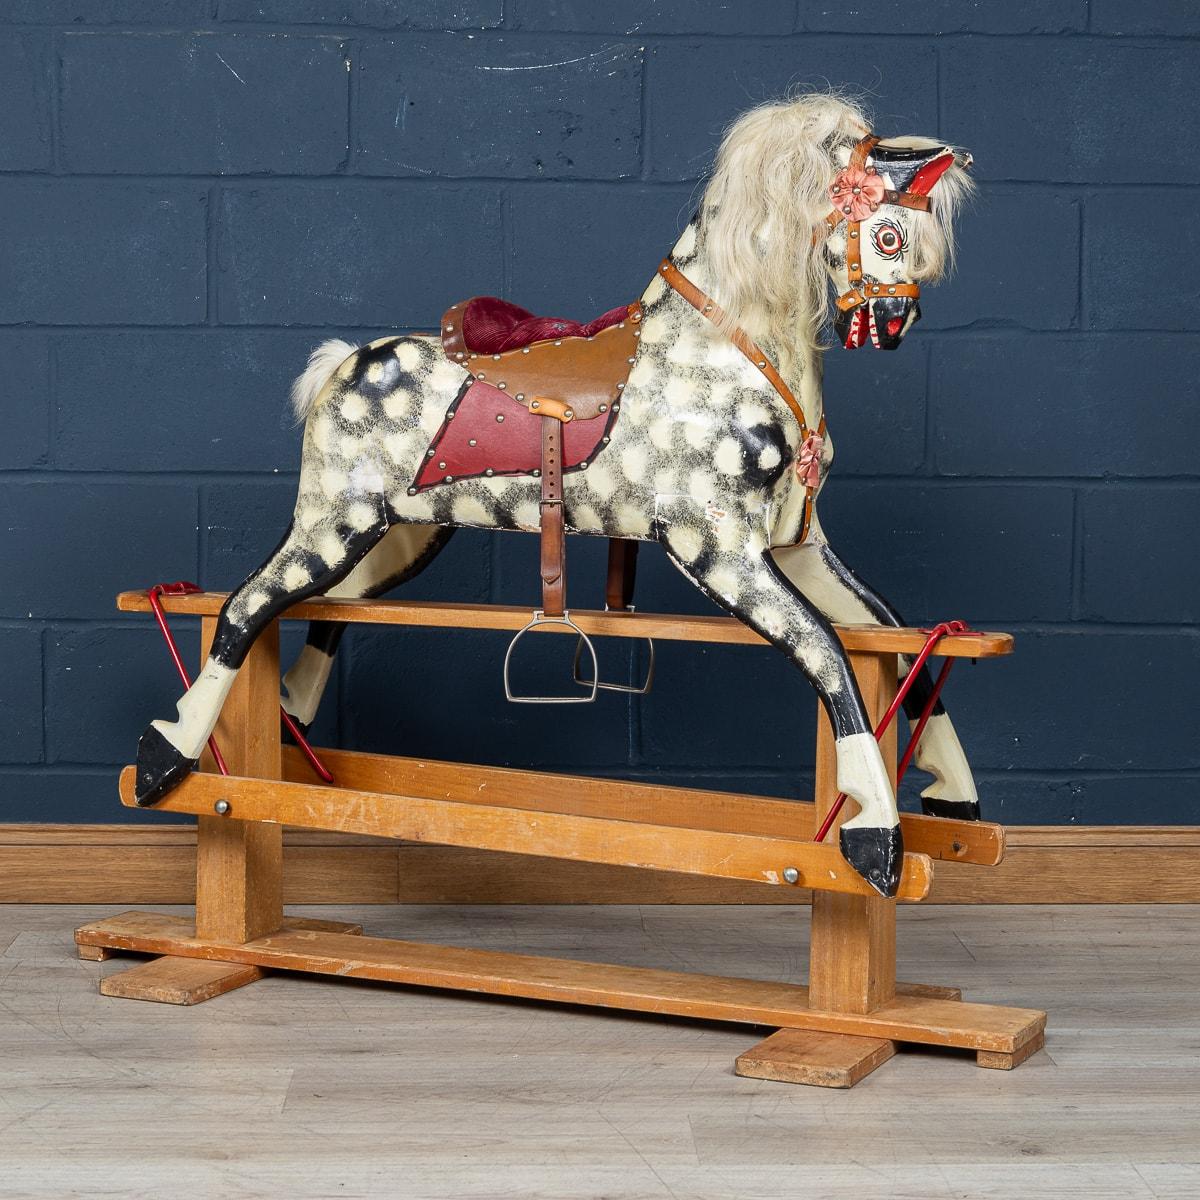 Mid-20th Century 20th Century Wooden Childs Rocking Horse By Collinson, England c.1930 For Sale